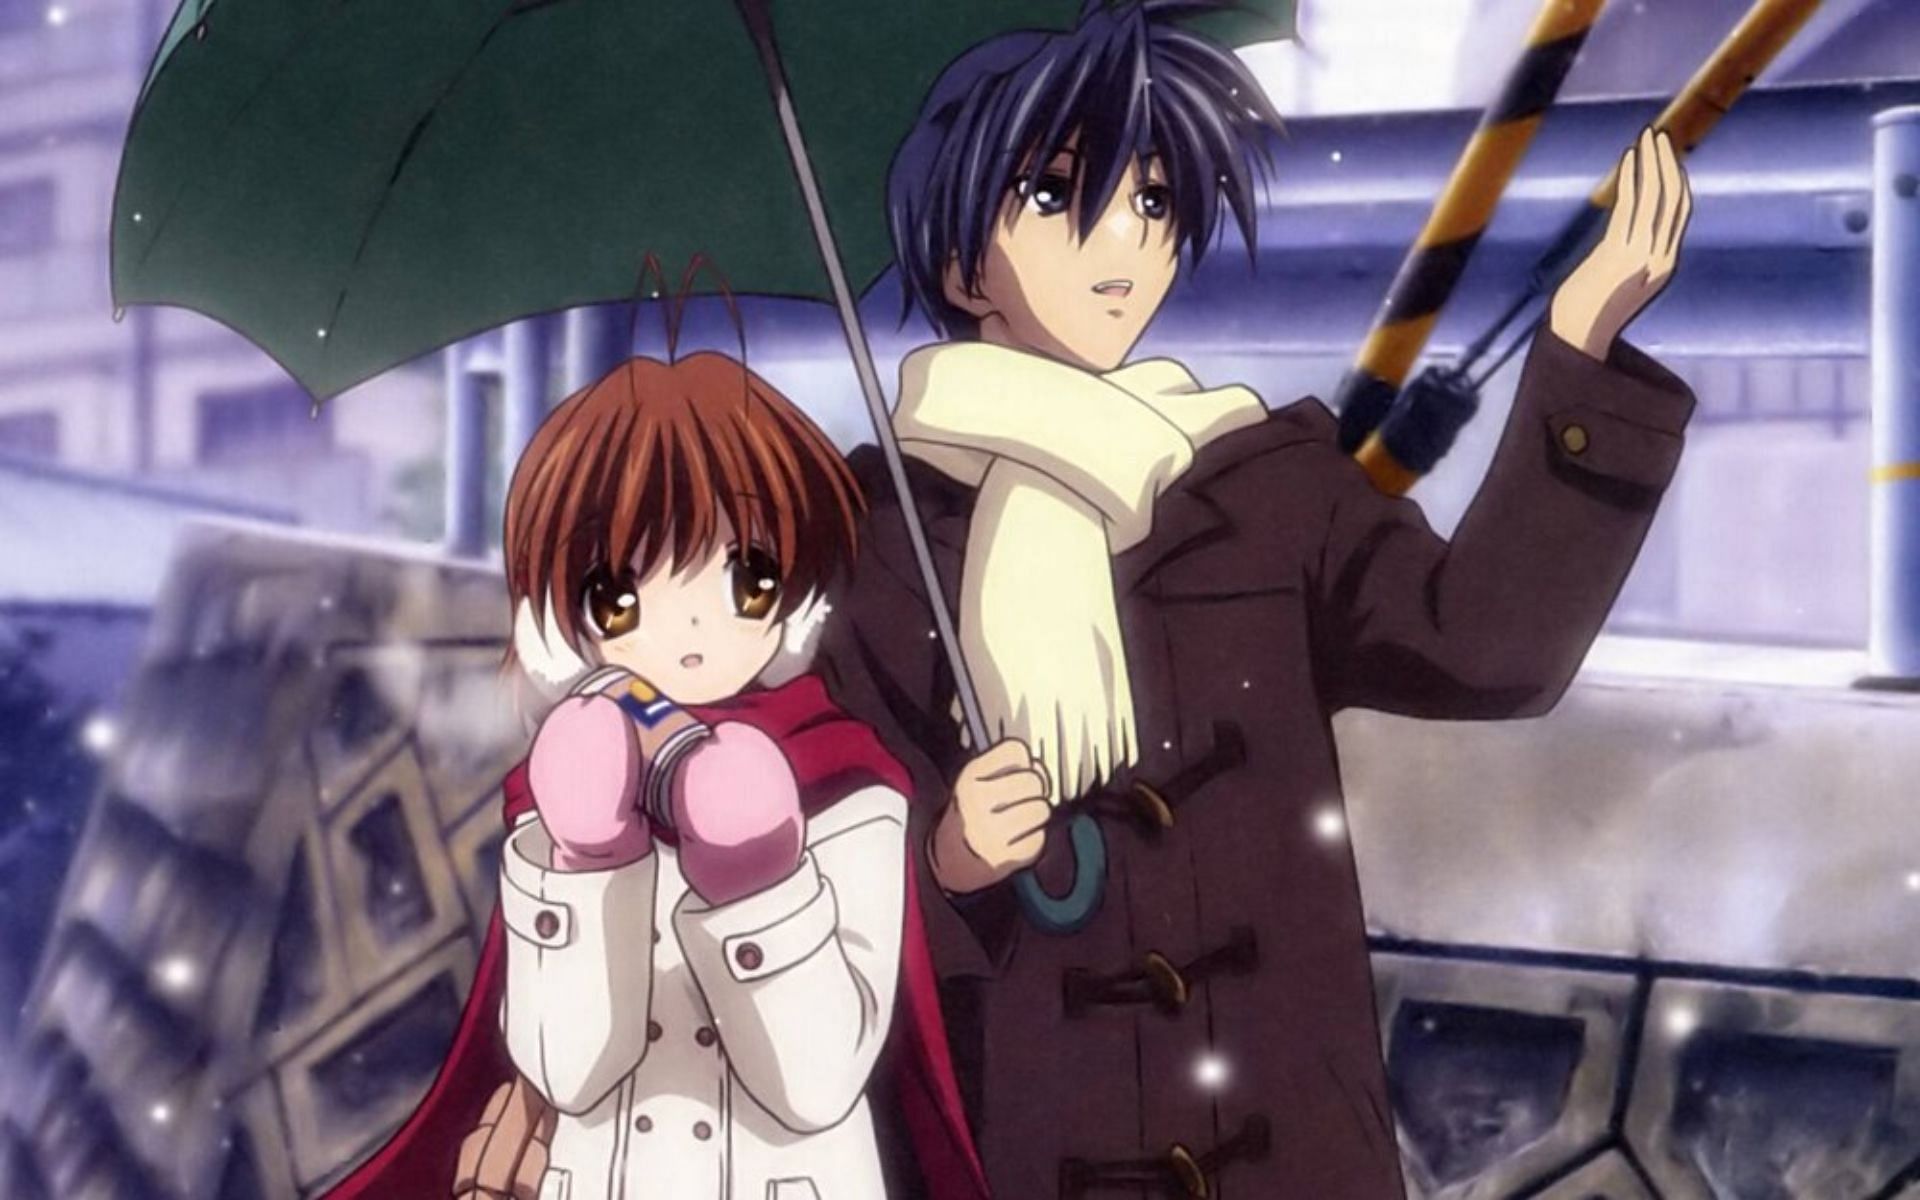 Stream Clannad: After Story on HIDIVE